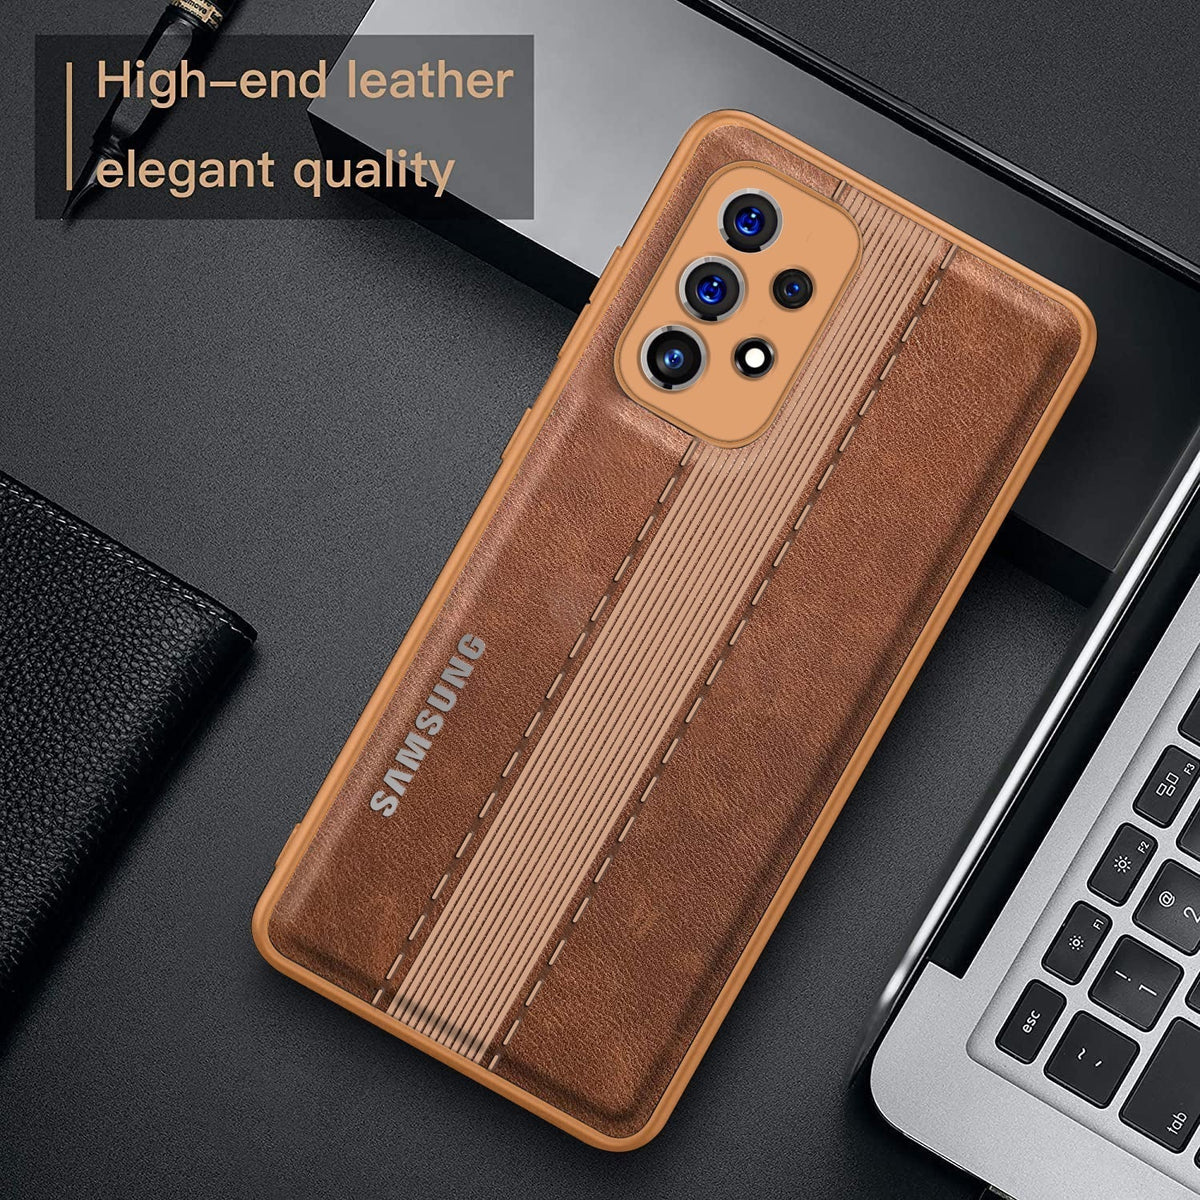 GALAXY A52s 5g VINTAGE LEATHER BACK STITCHED PROTECTIVE BACK CASE